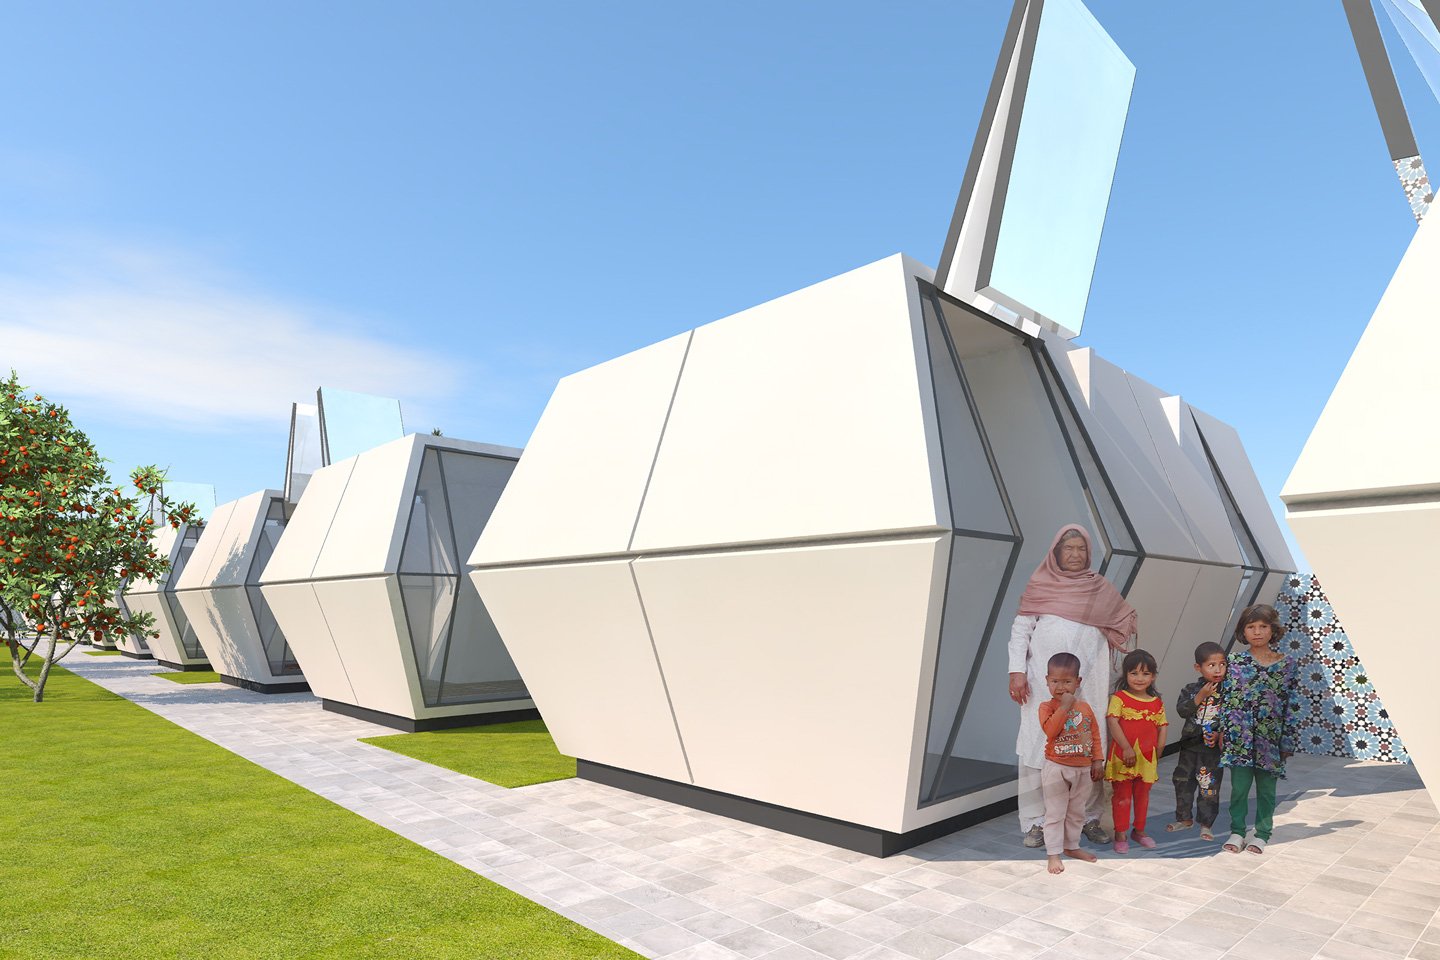 #Origami-inspired Prefab Pod with a folding design makes it easy to set up instant refugee shelters